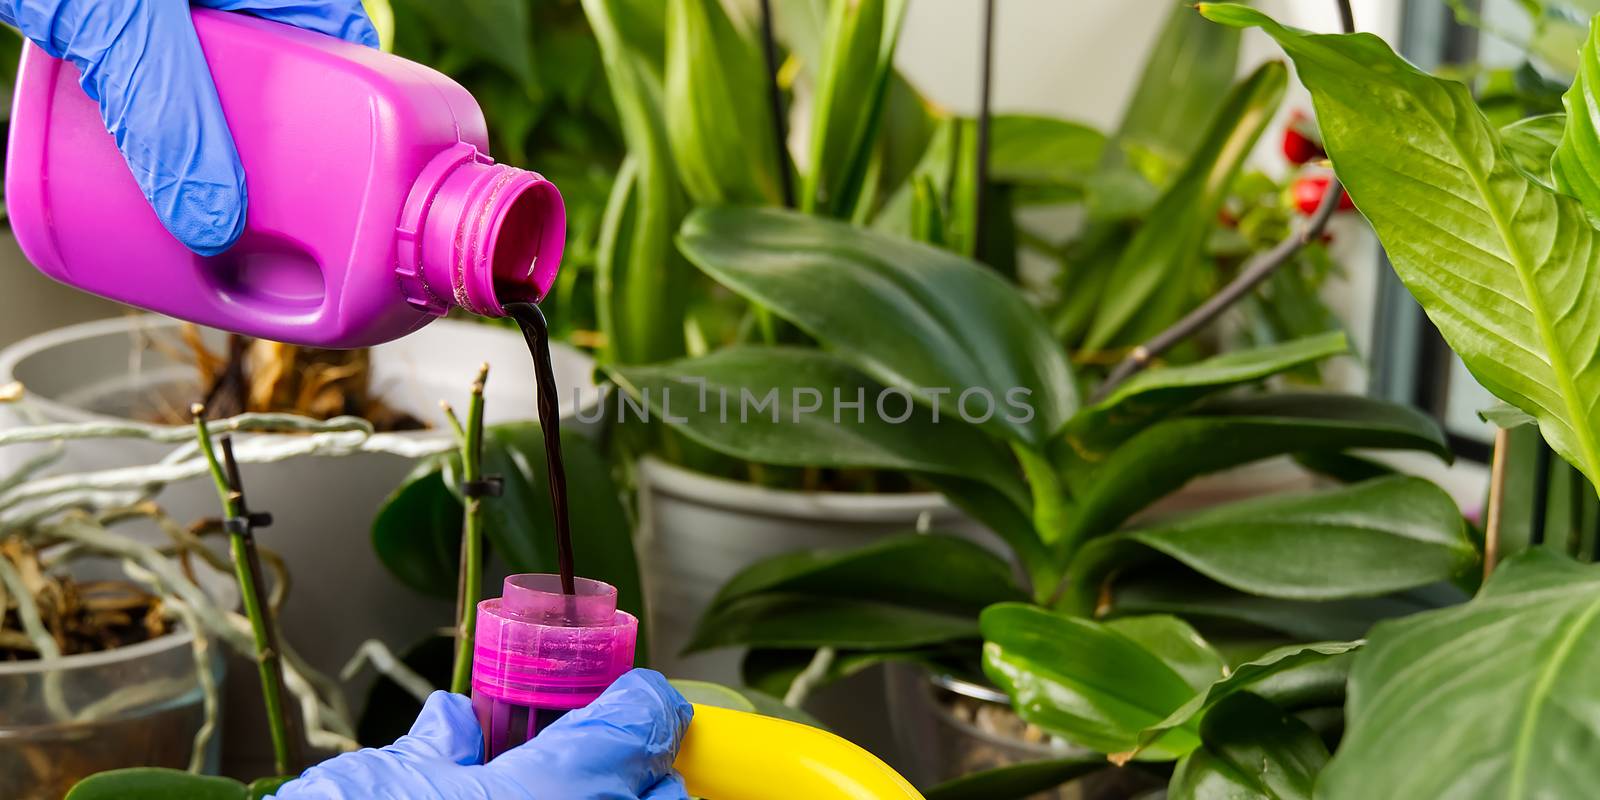 gardener fertilizer home orchid plants. houseplant care. woman watering orchid flowers. , housework and plants care concept. Home gardening by PhotoTime